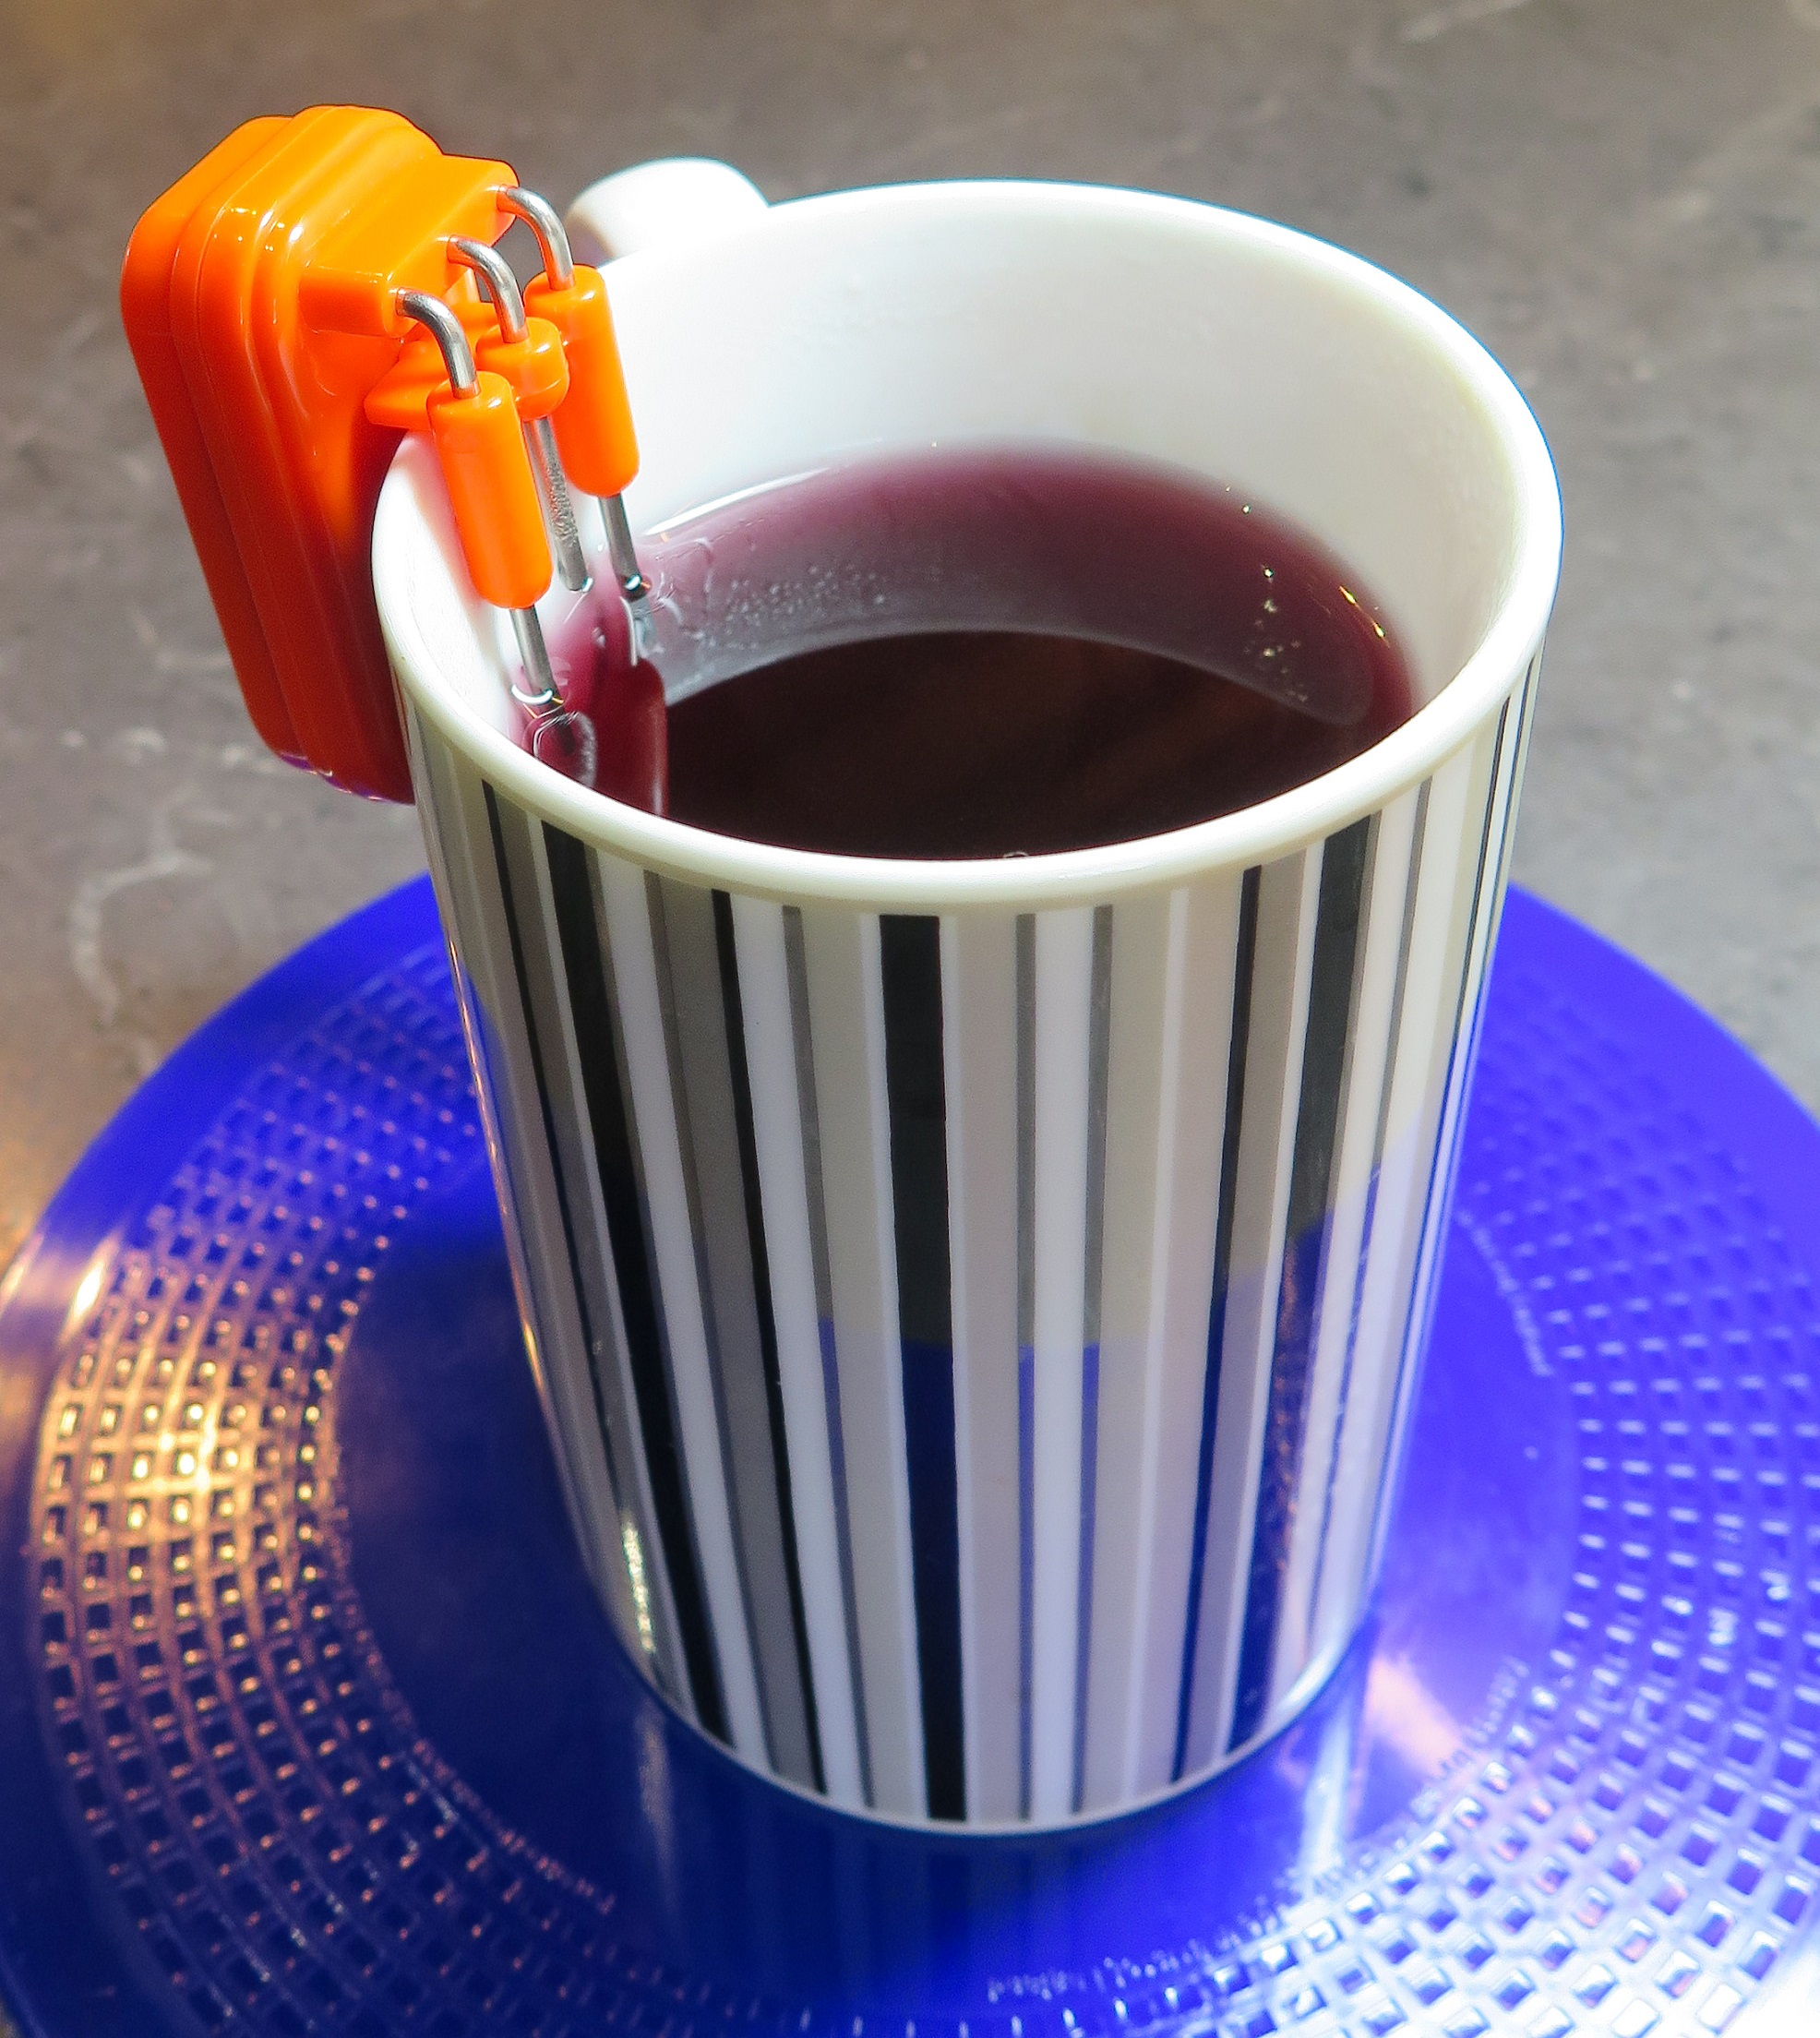 Image showing hot drink with liquid level indicator